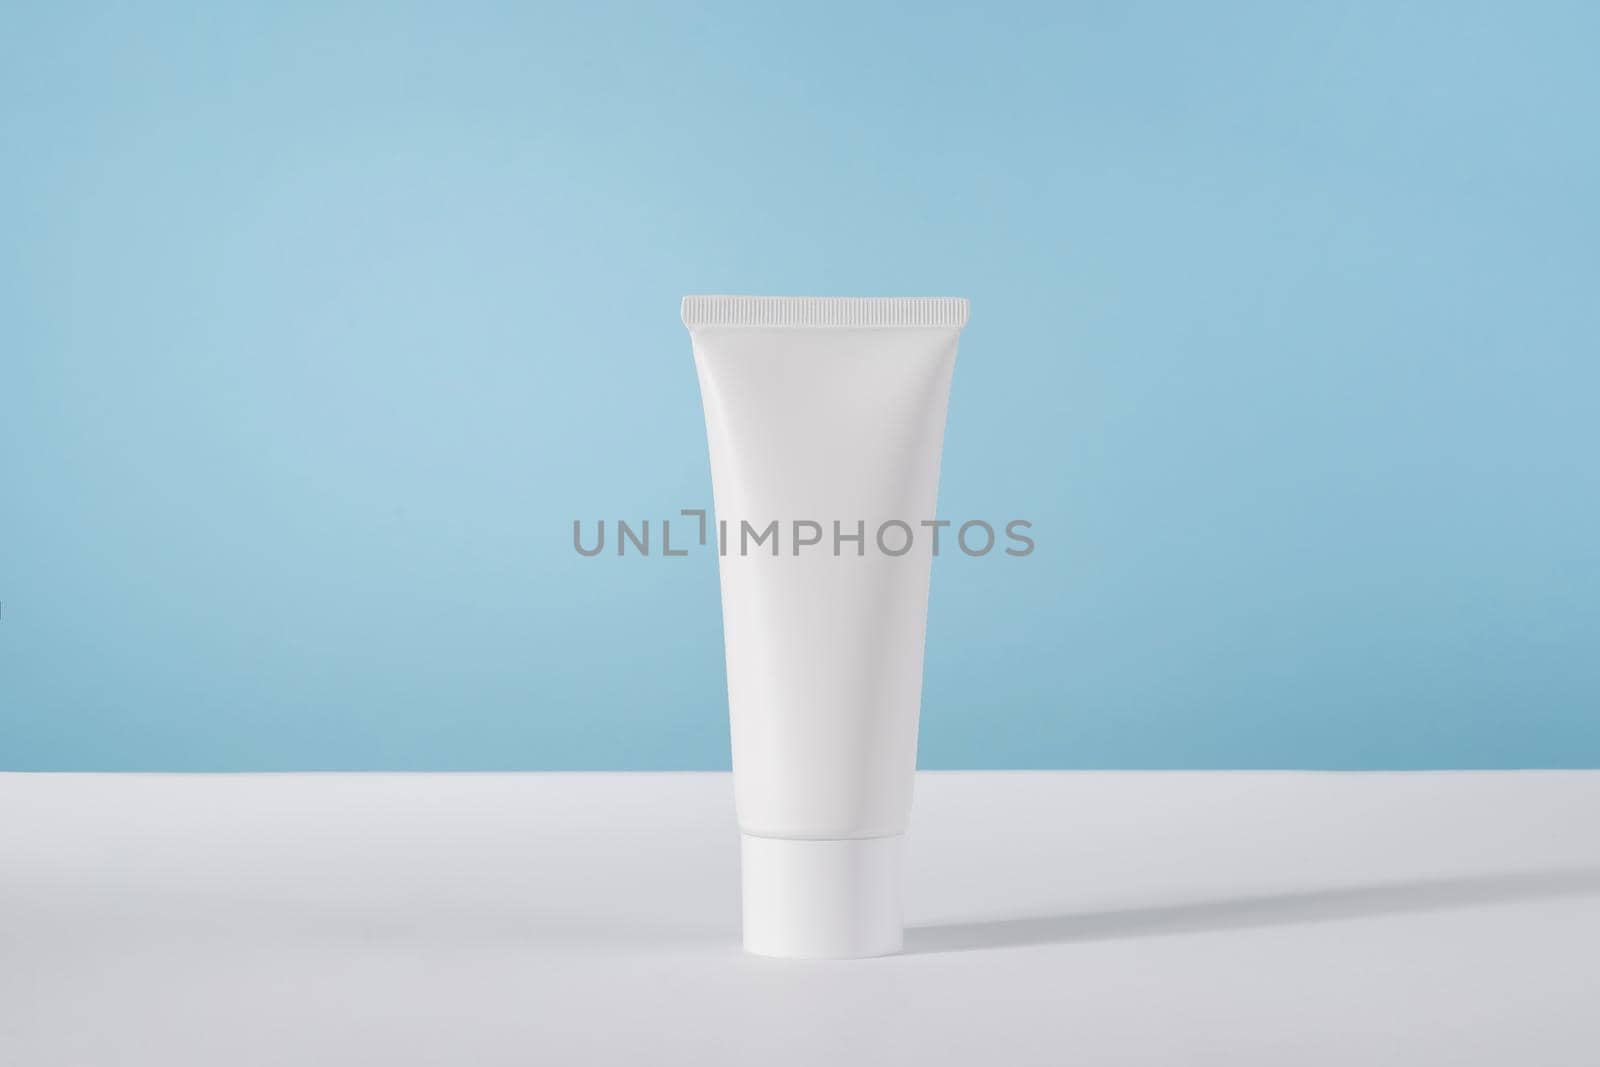 Moisturiser hand cosmetic cream white plastic tube mockup on blue background front view. Blank body and health care beauty product packaging. Hand cream bottle